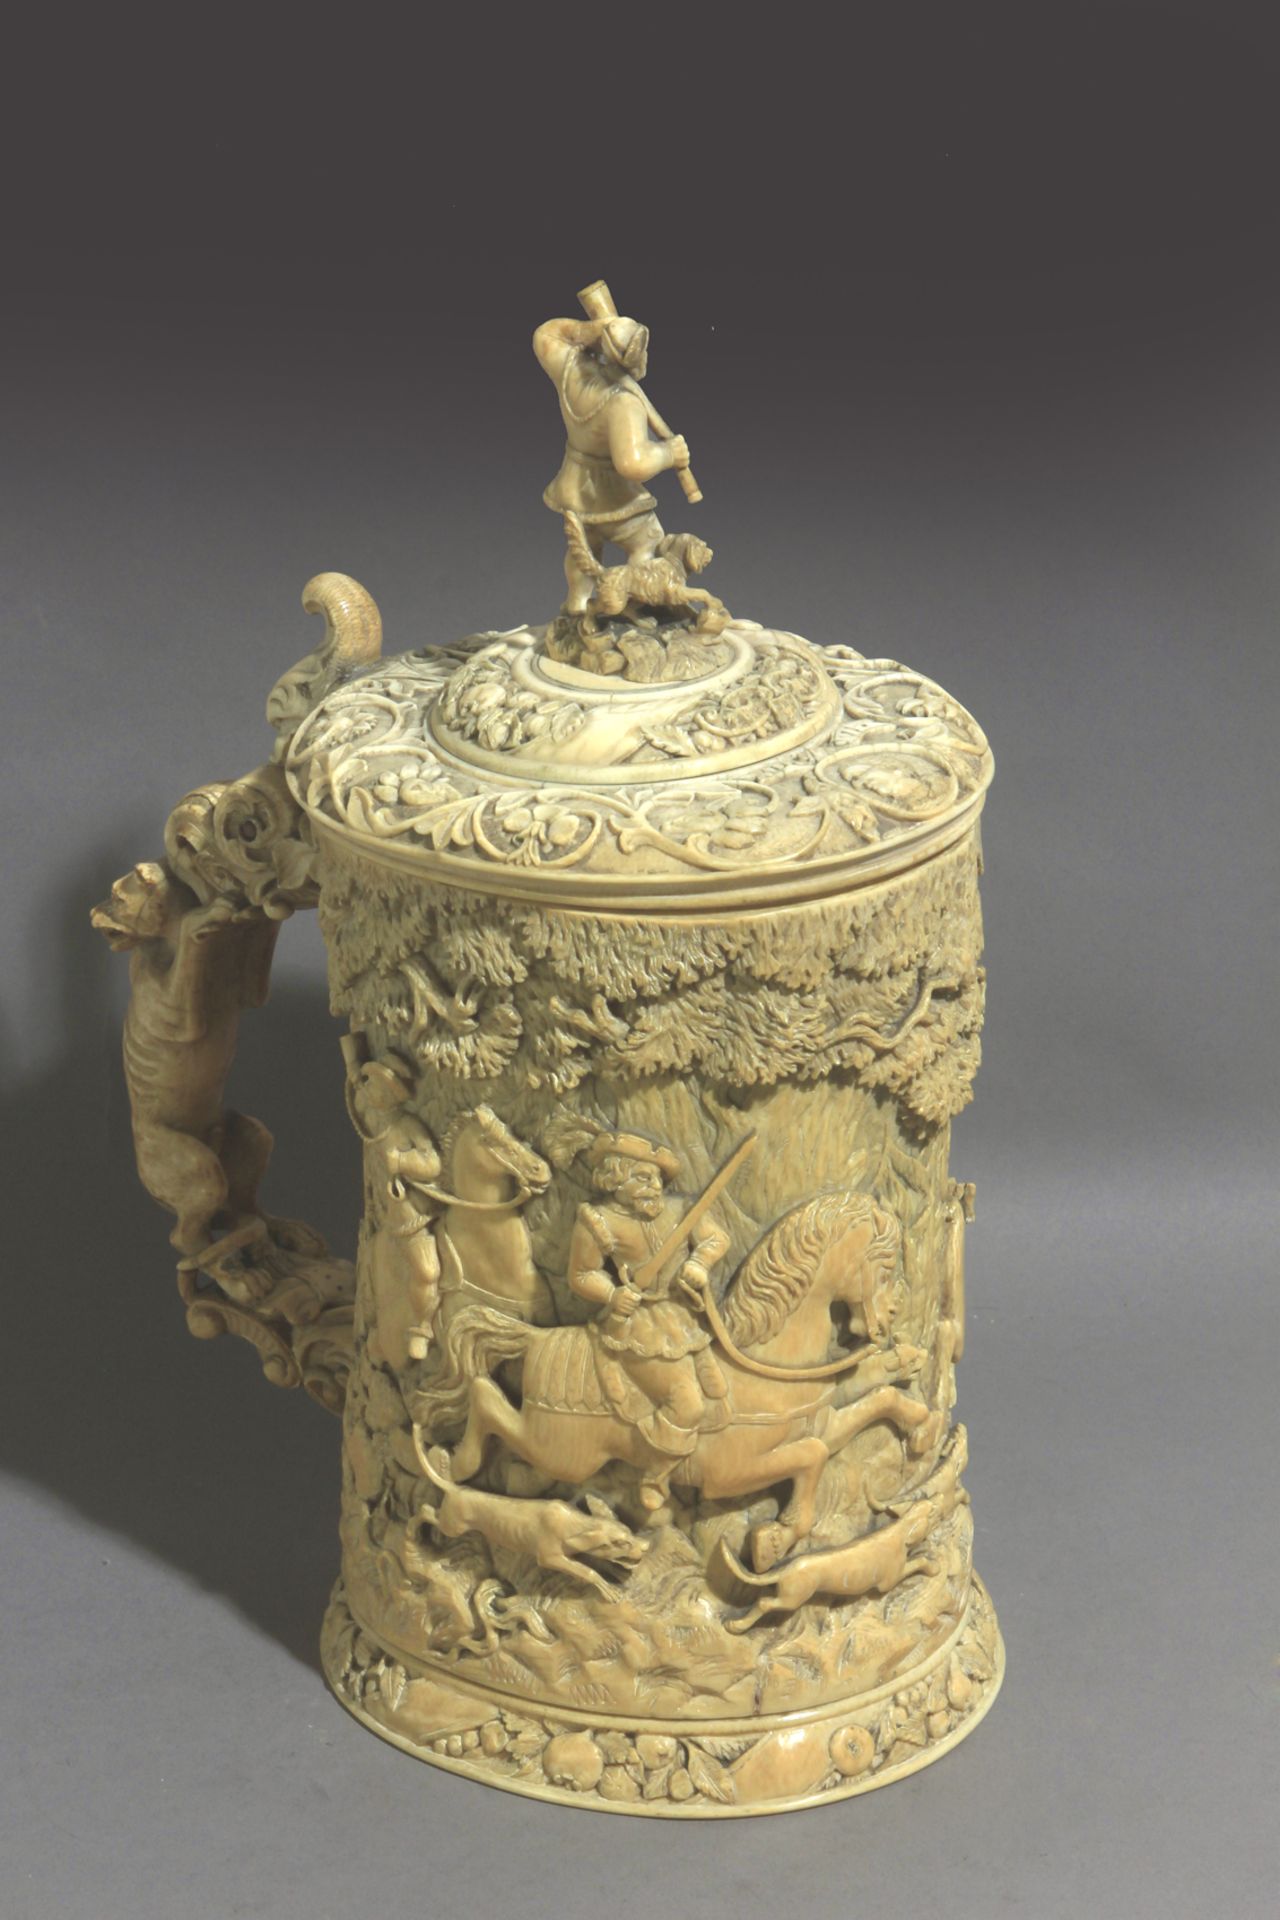 Early 18th century possibly German tankard - Image 3 of 14